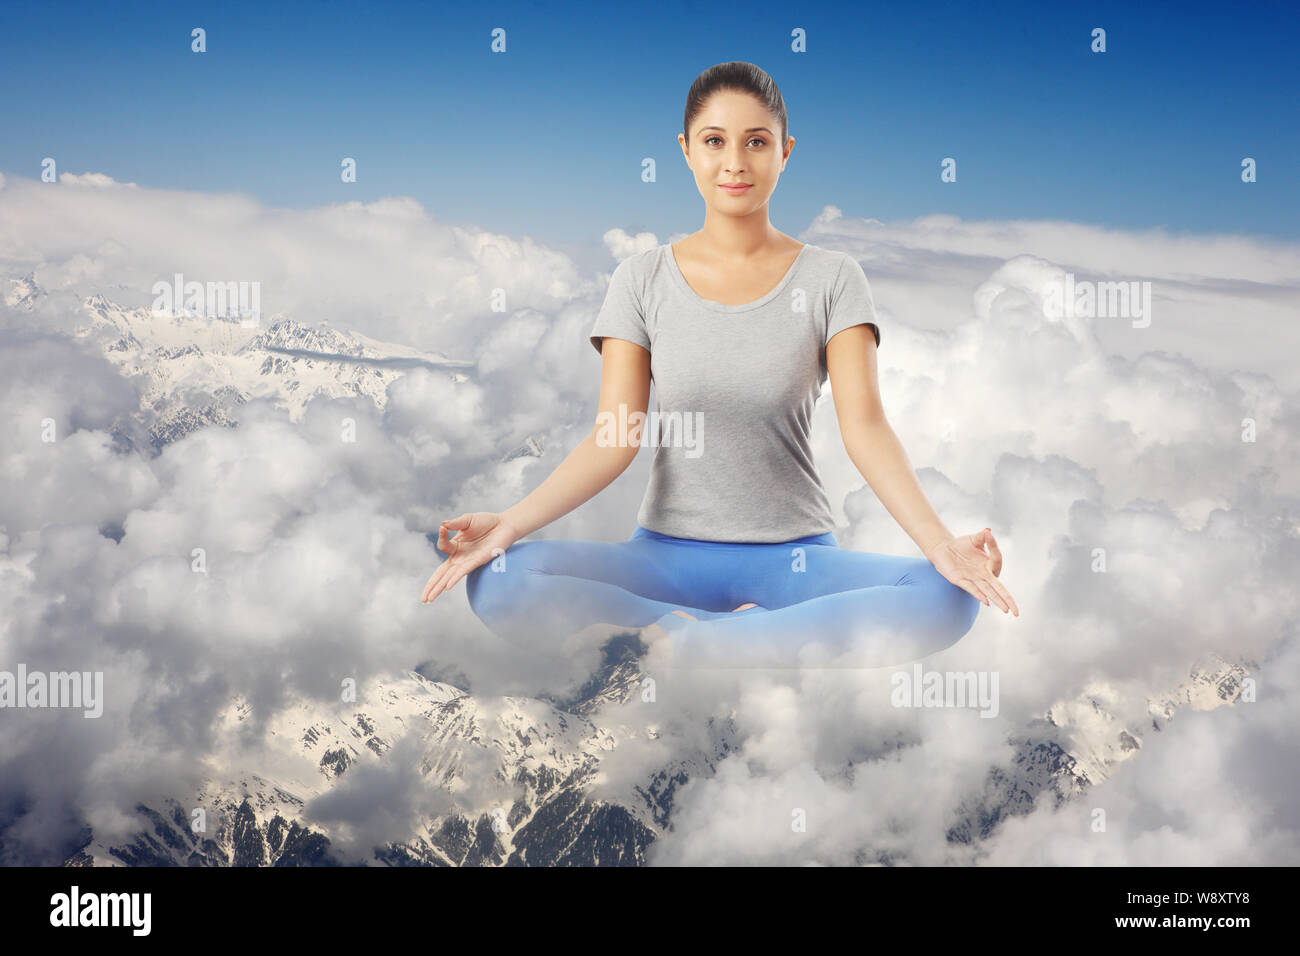 Young woman practicing yoga Stock Photo